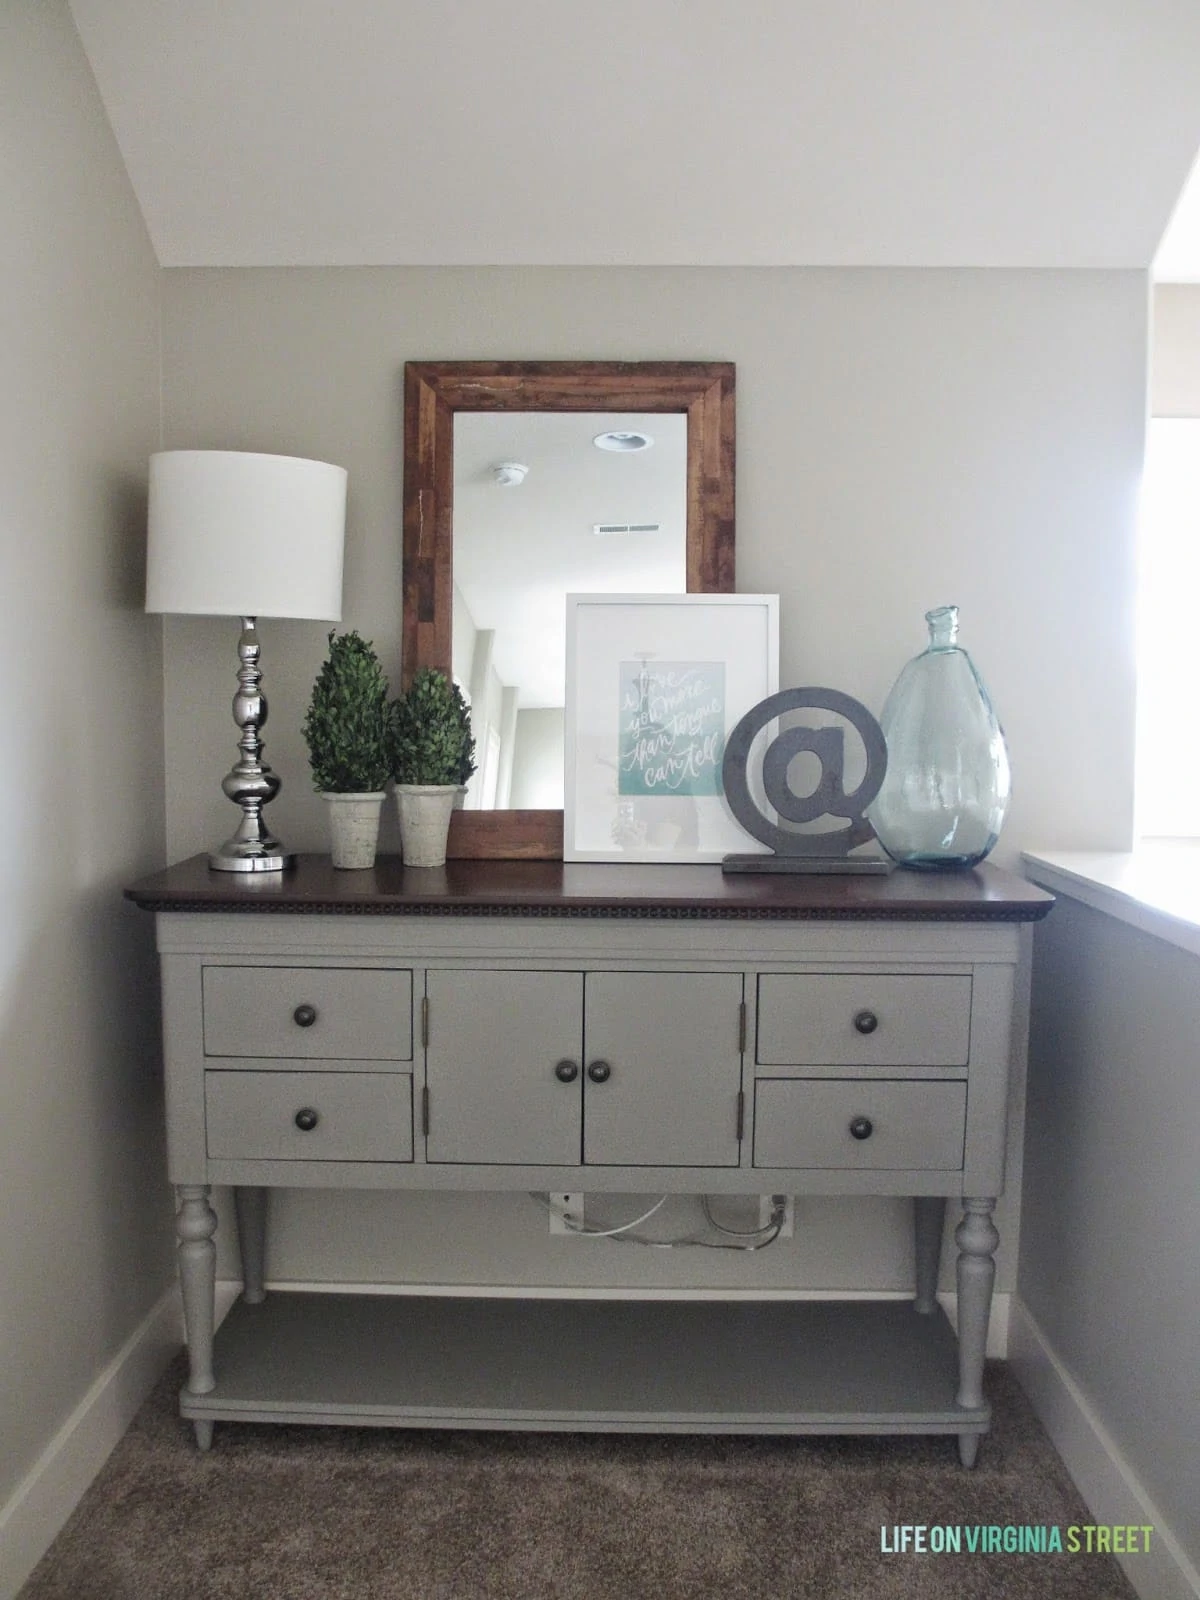 Chalk painted buffet table with Behr Castle Path painted walls. We used this painted buffet table to hide our wi-fi setup and add a little something extra to the upstairs hallway makeover.